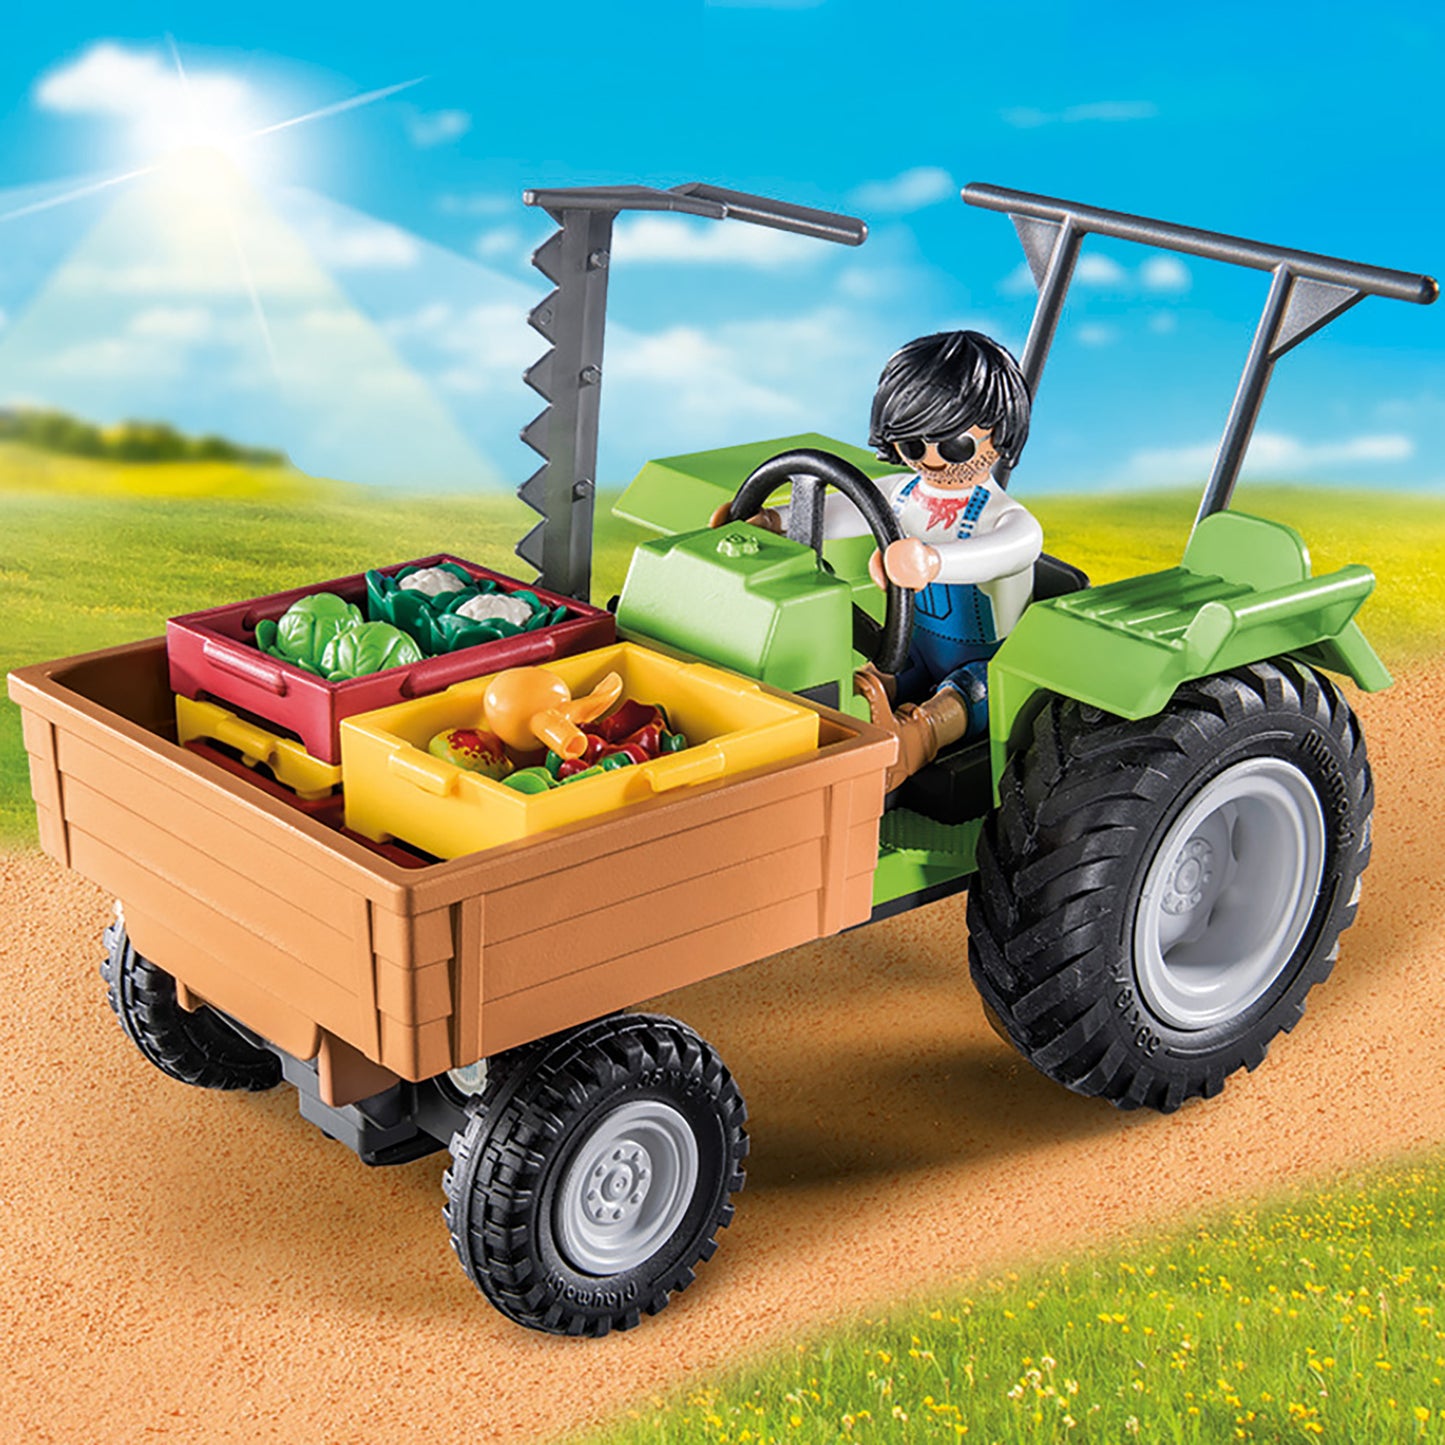 Tractor with Harvesting Trailer | Country | Eco-Plastic | Open-Ended Play For Kids